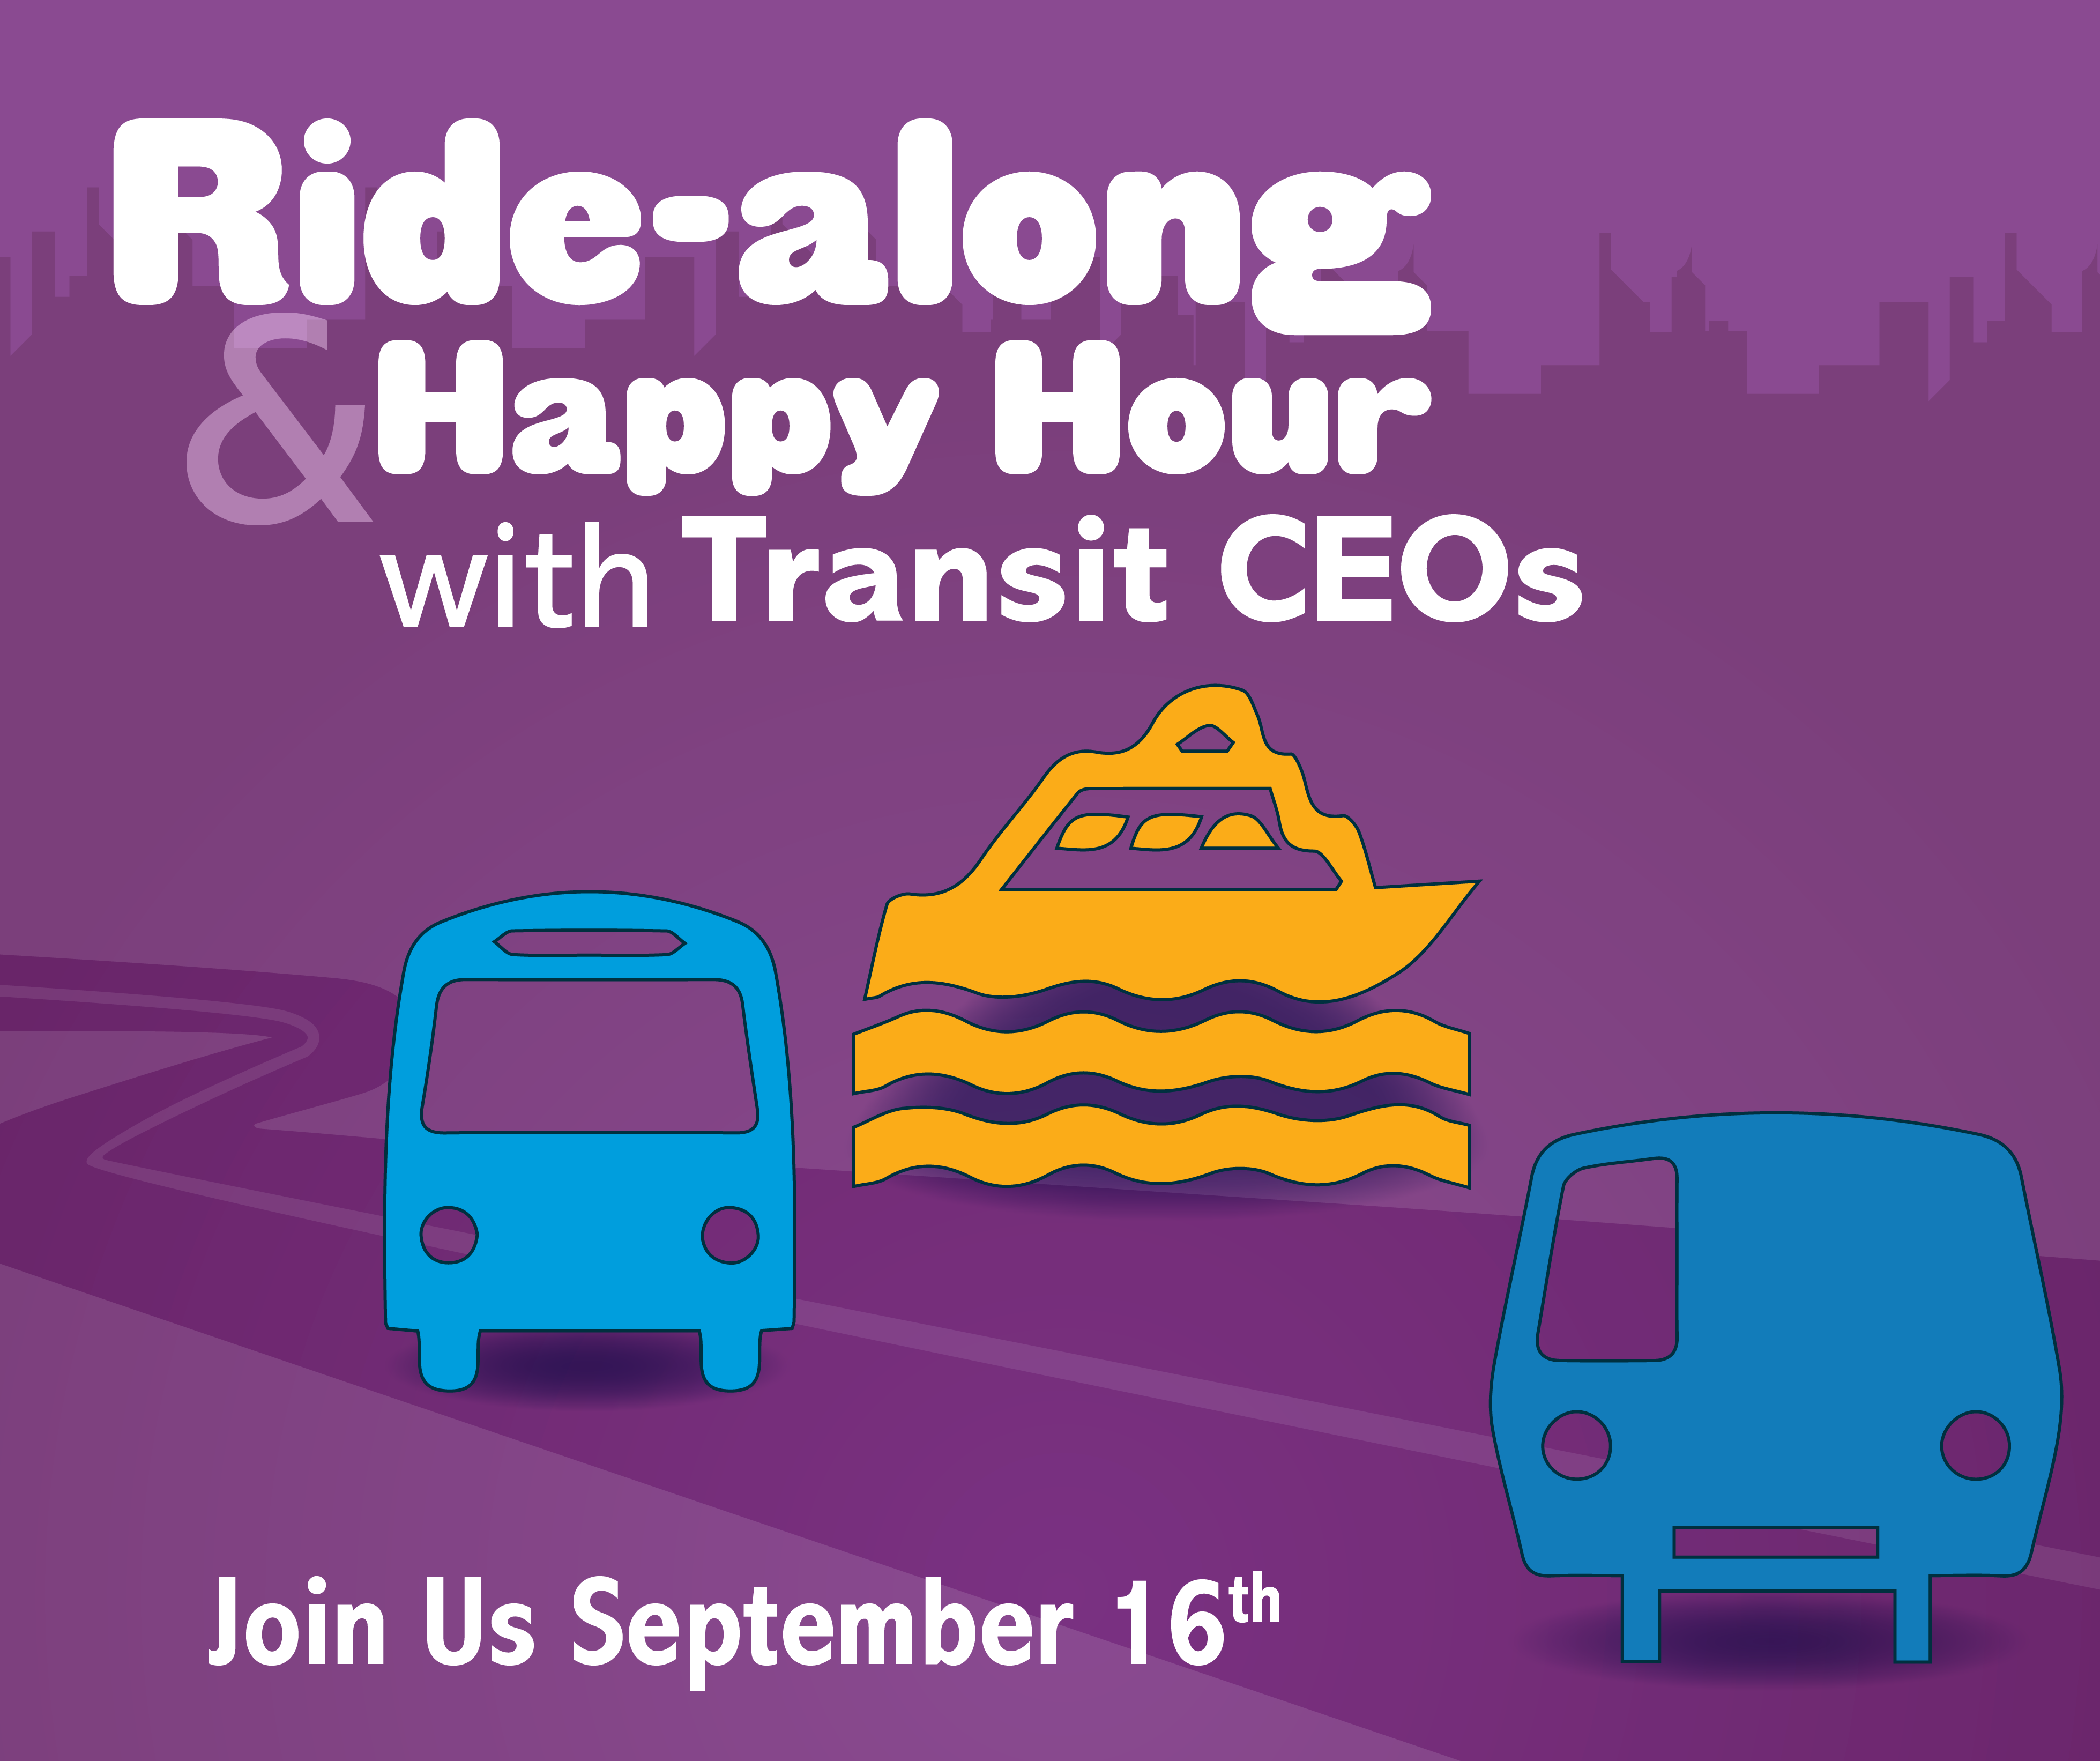 Ride-a-long & Happy Hour with Transit CEOs